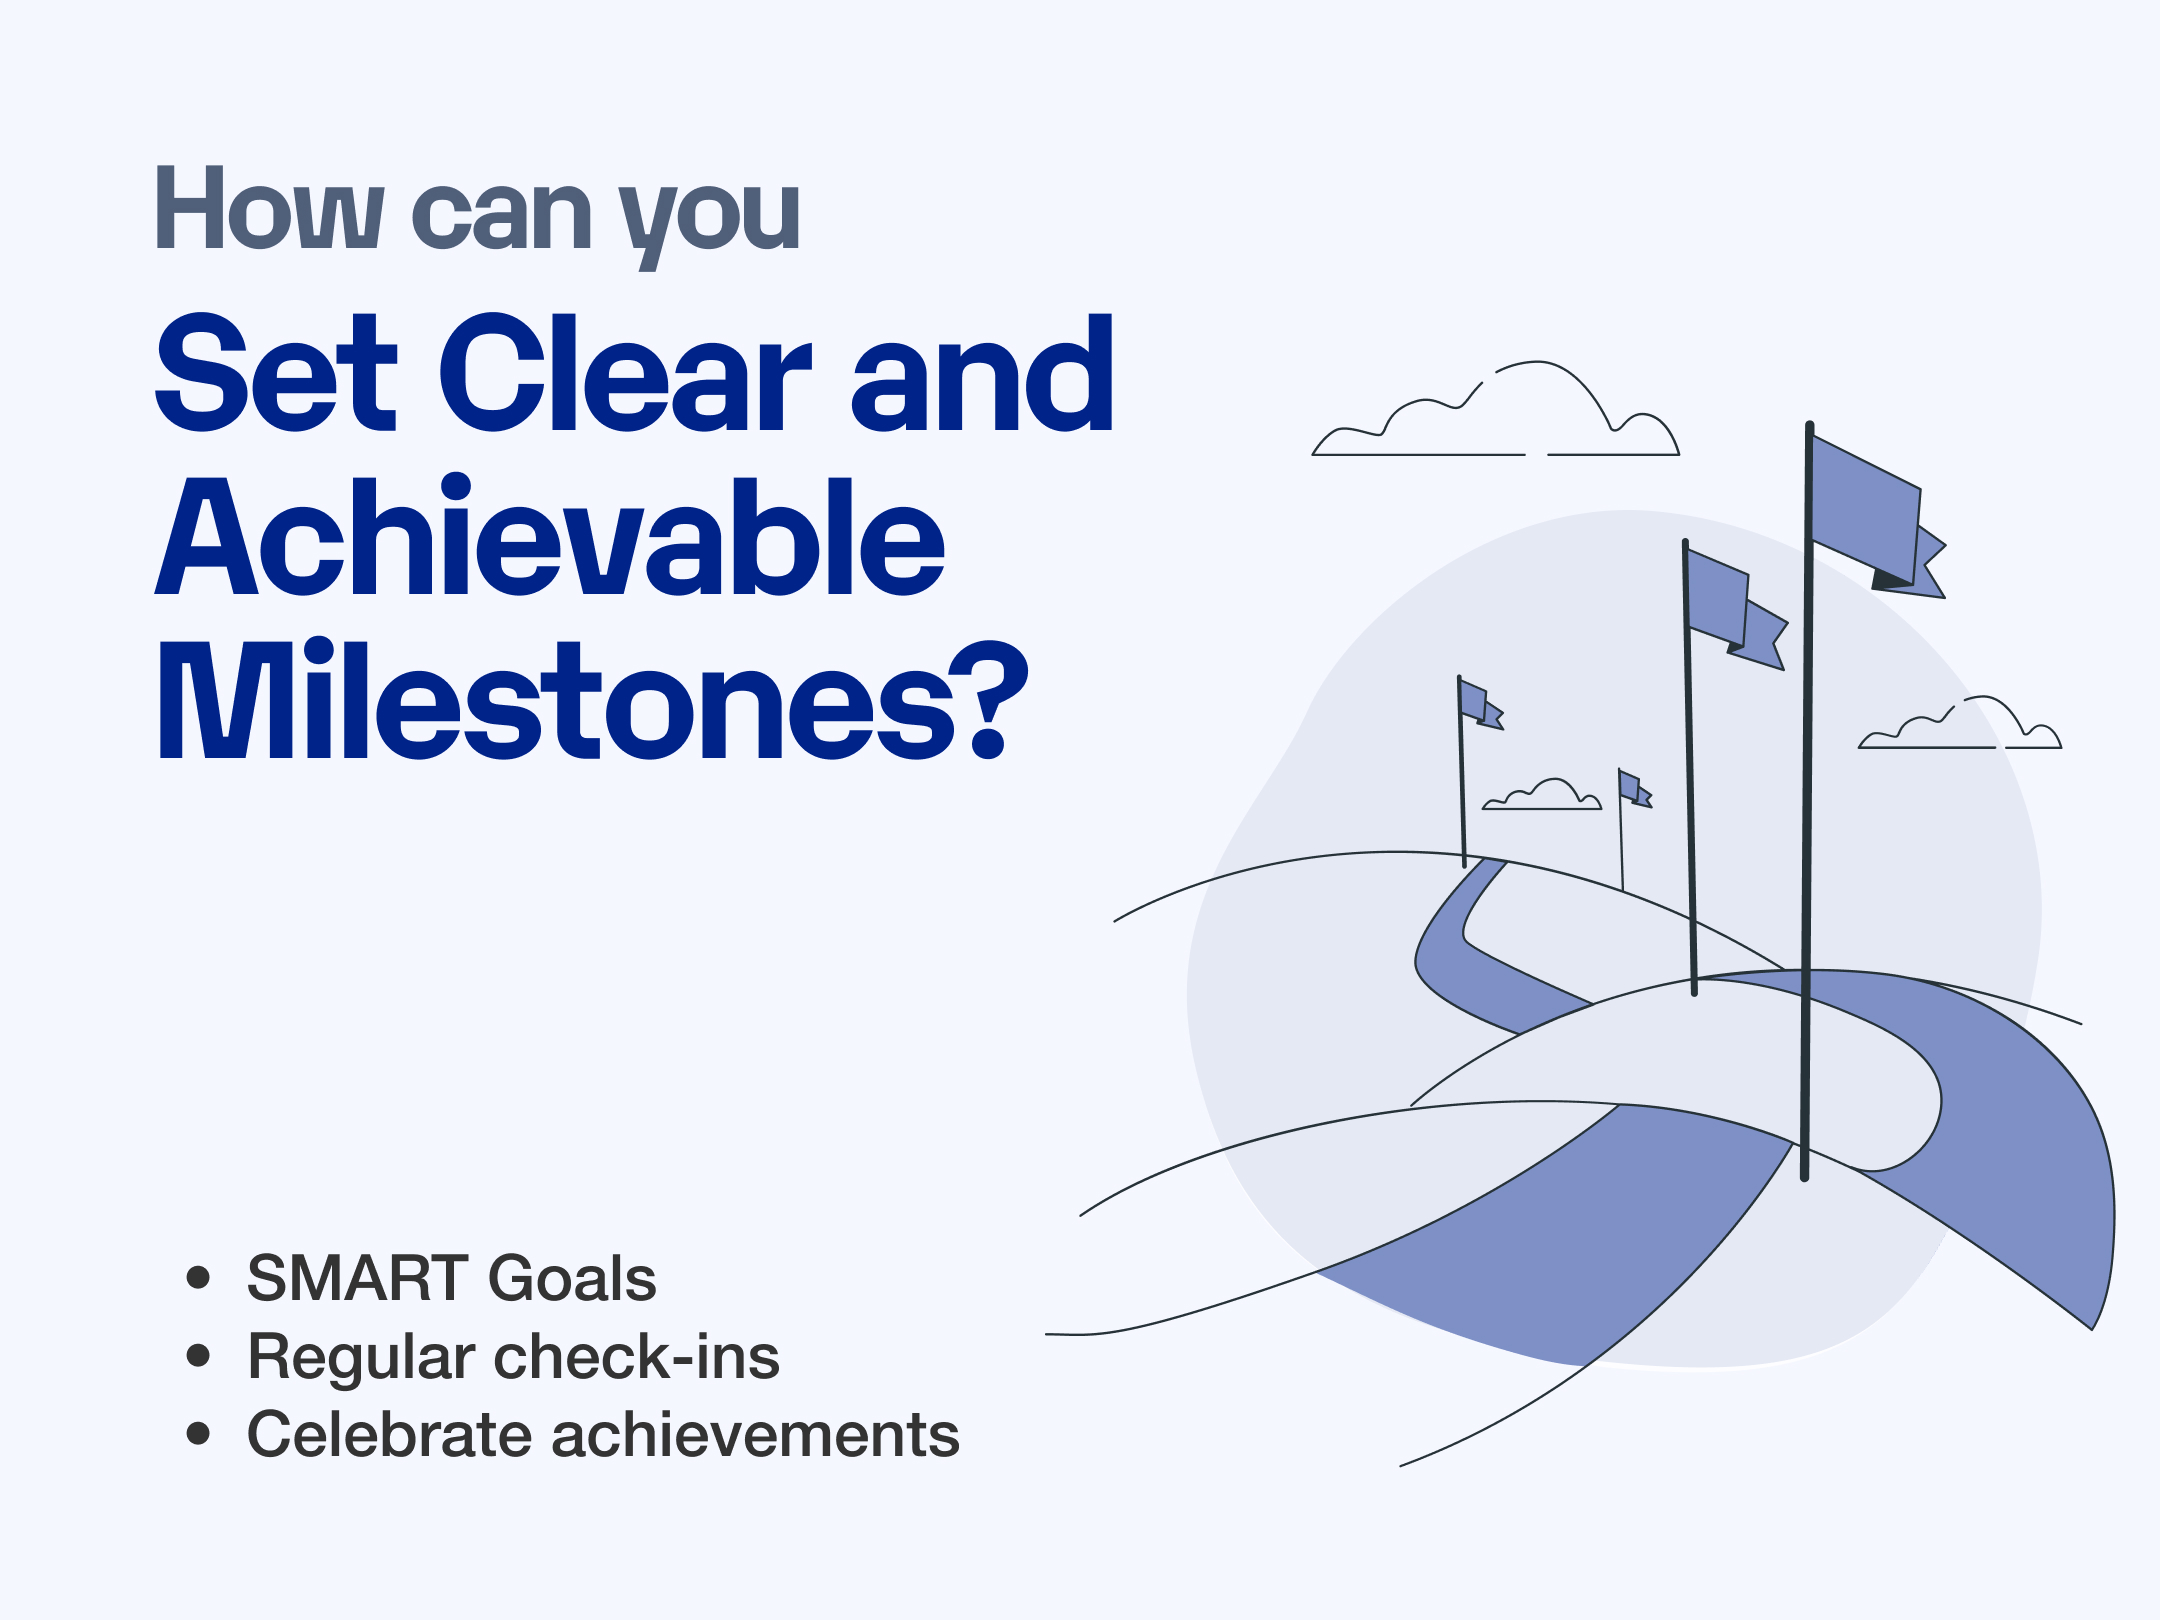 How can you set clear and achievable milestones?